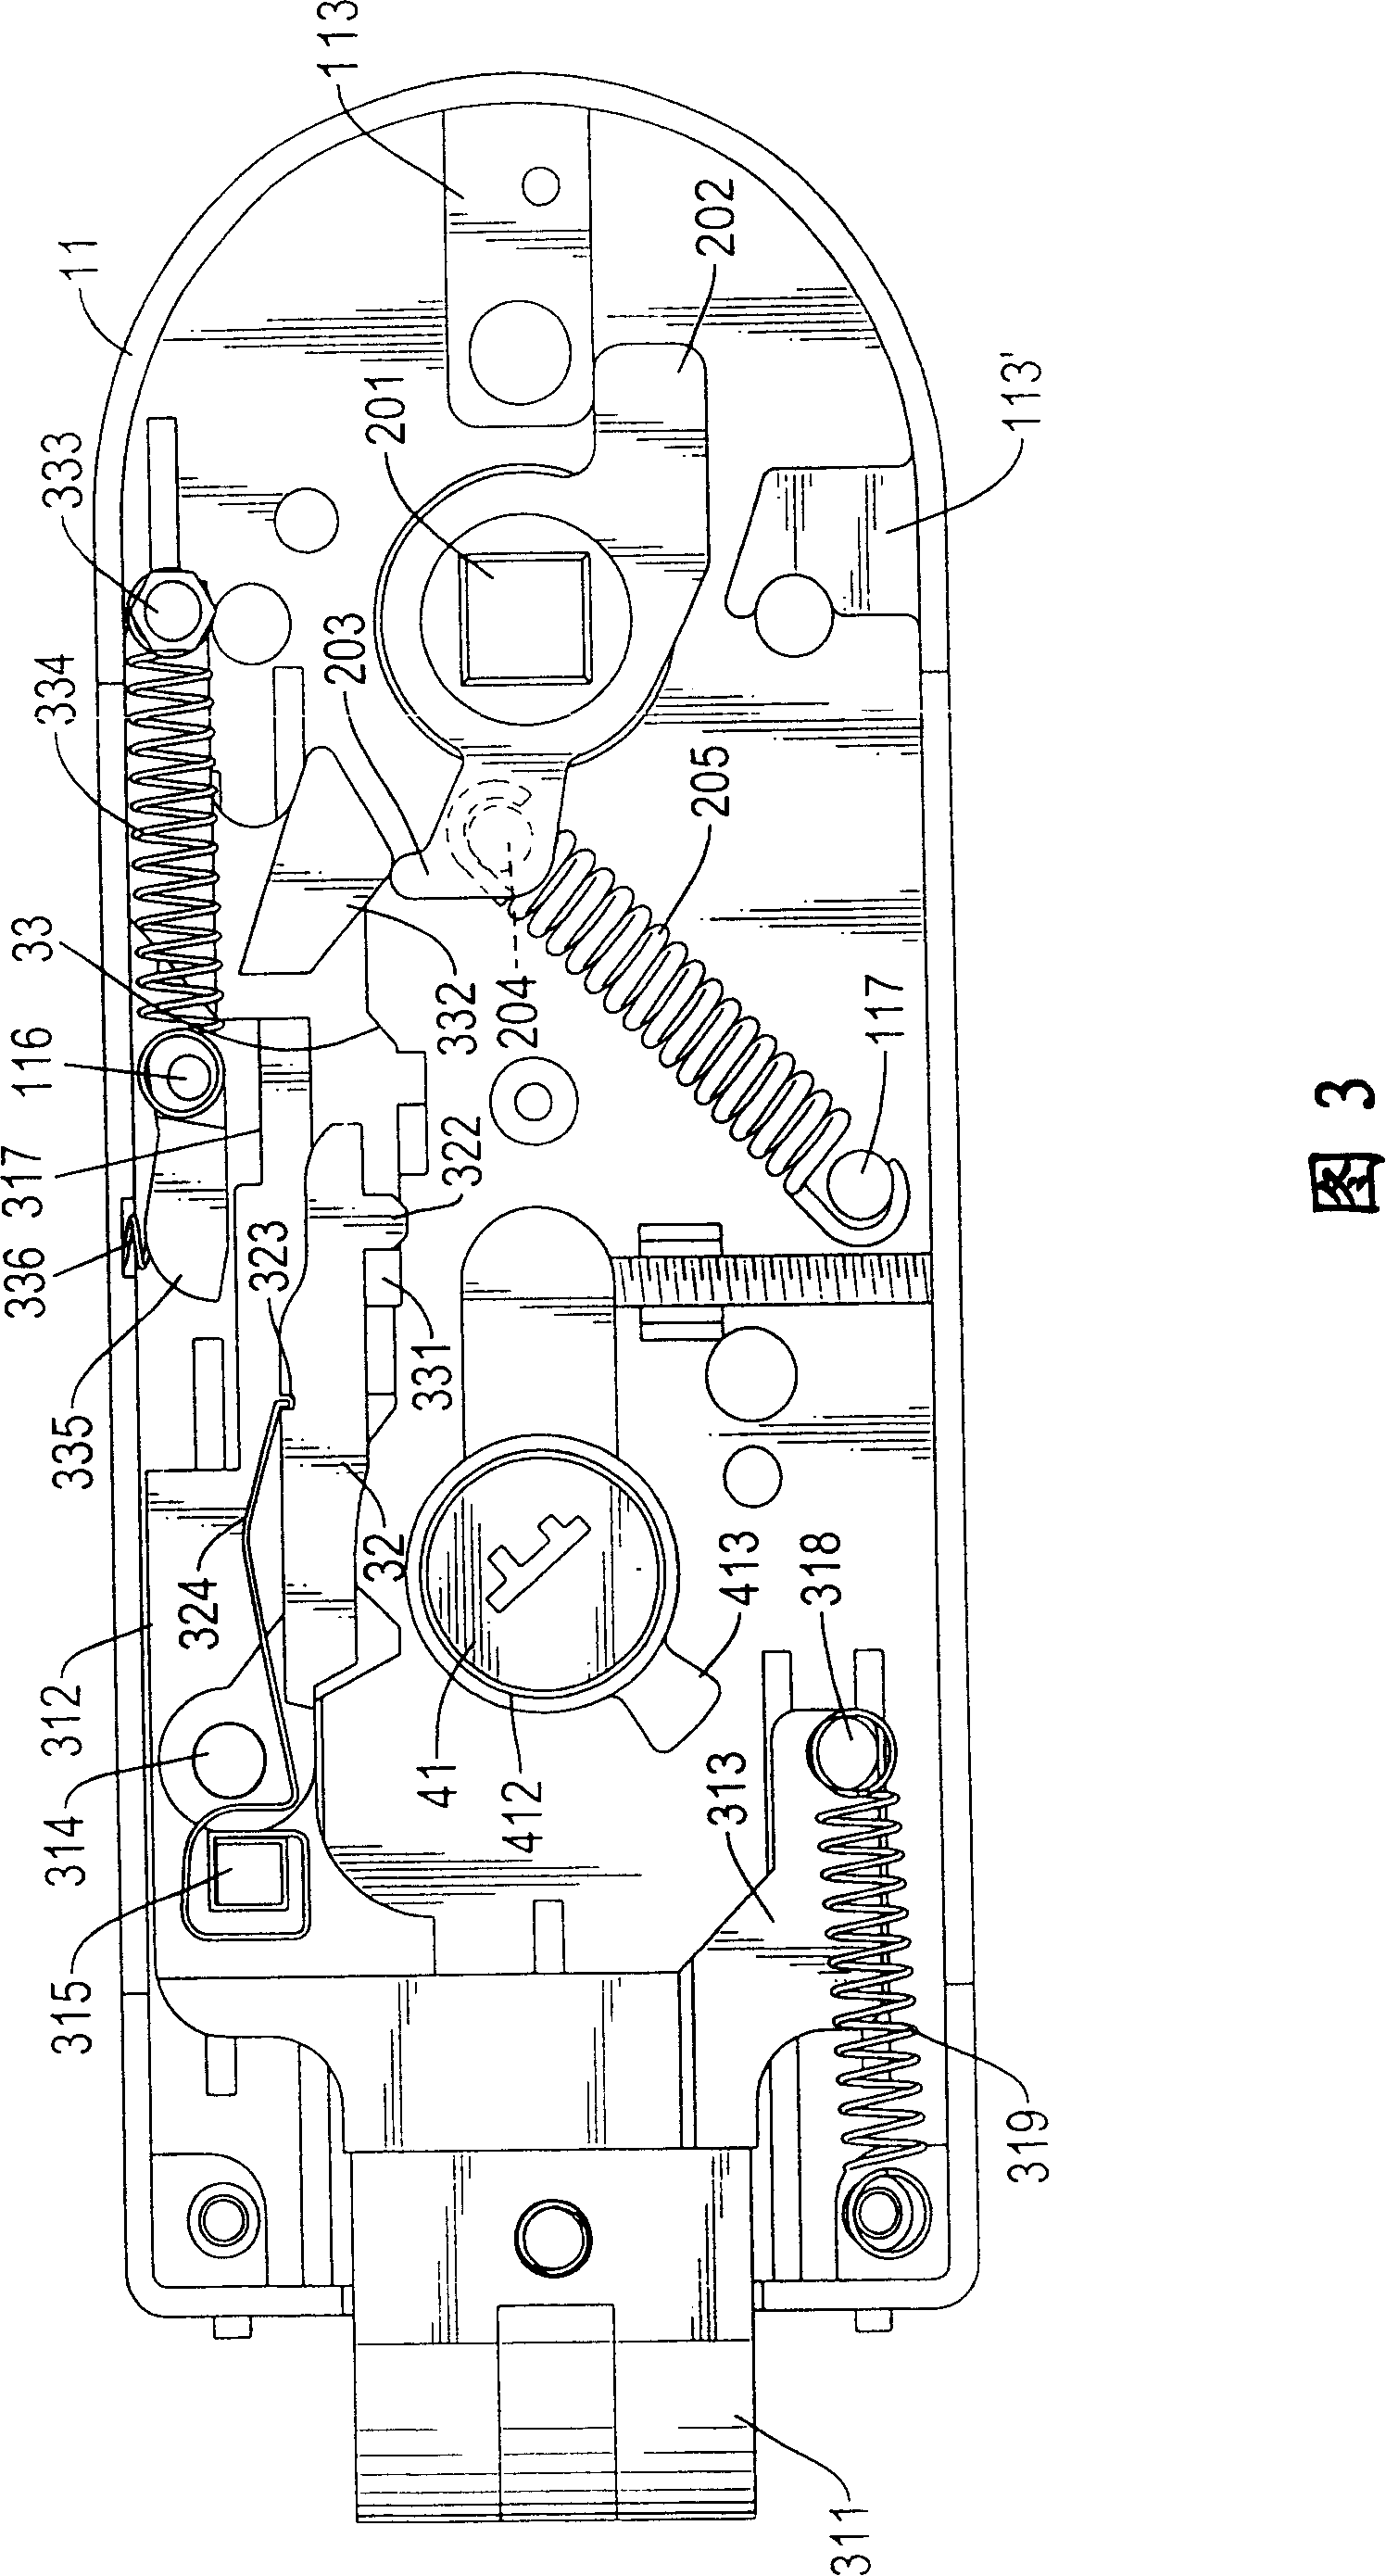 Locking device for non-frame glass door